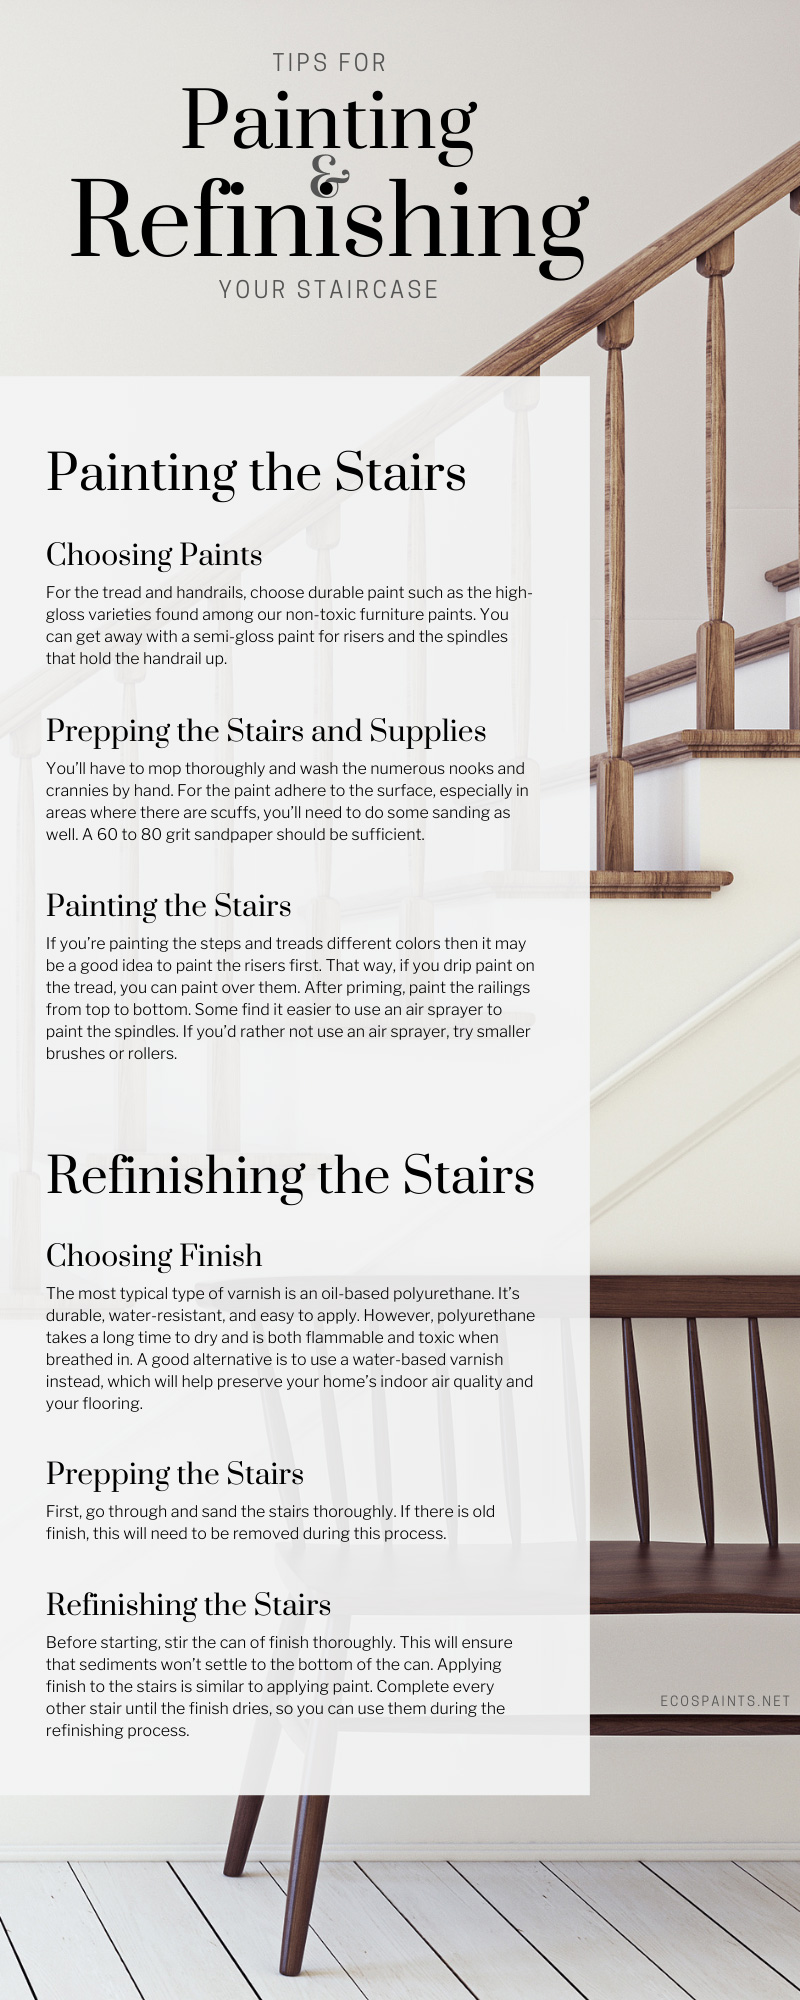 Tips for Painting and Refinishing Your Staircase